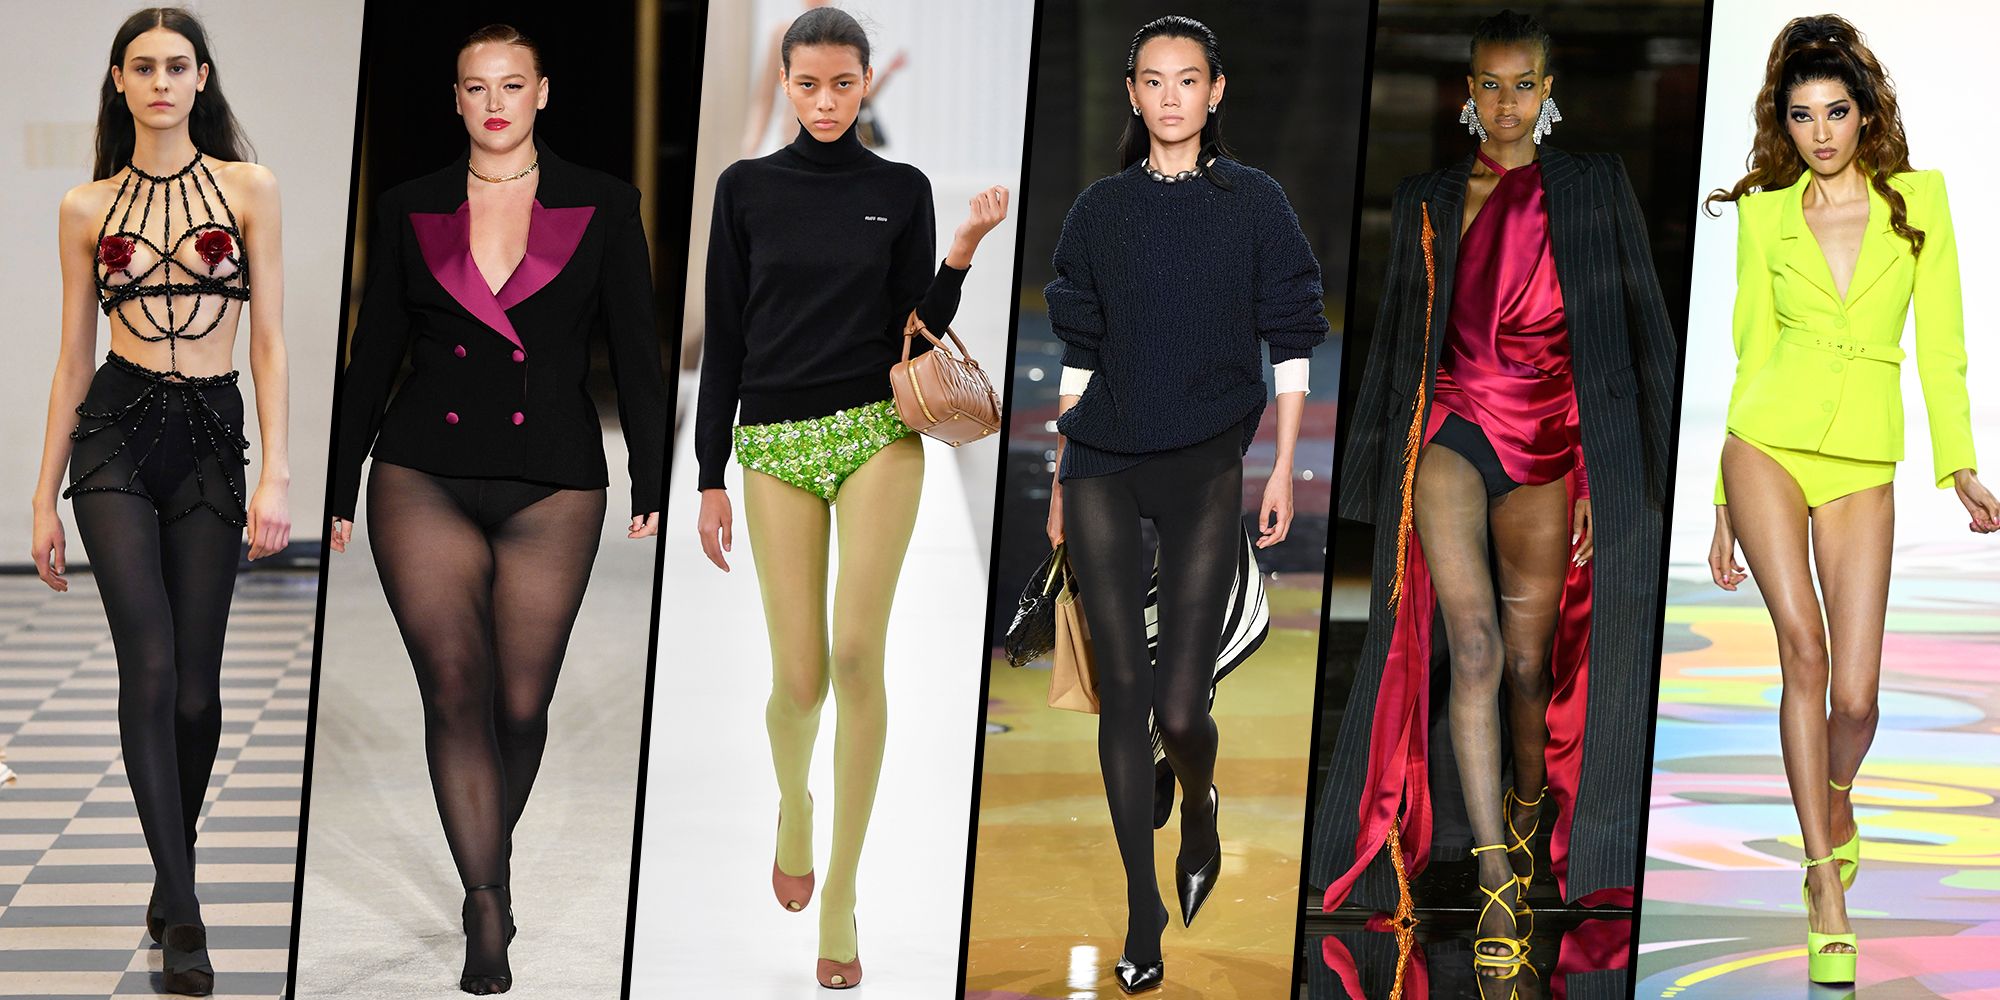 Underwear as Outerwear, the Pantastic trend hitting the runways